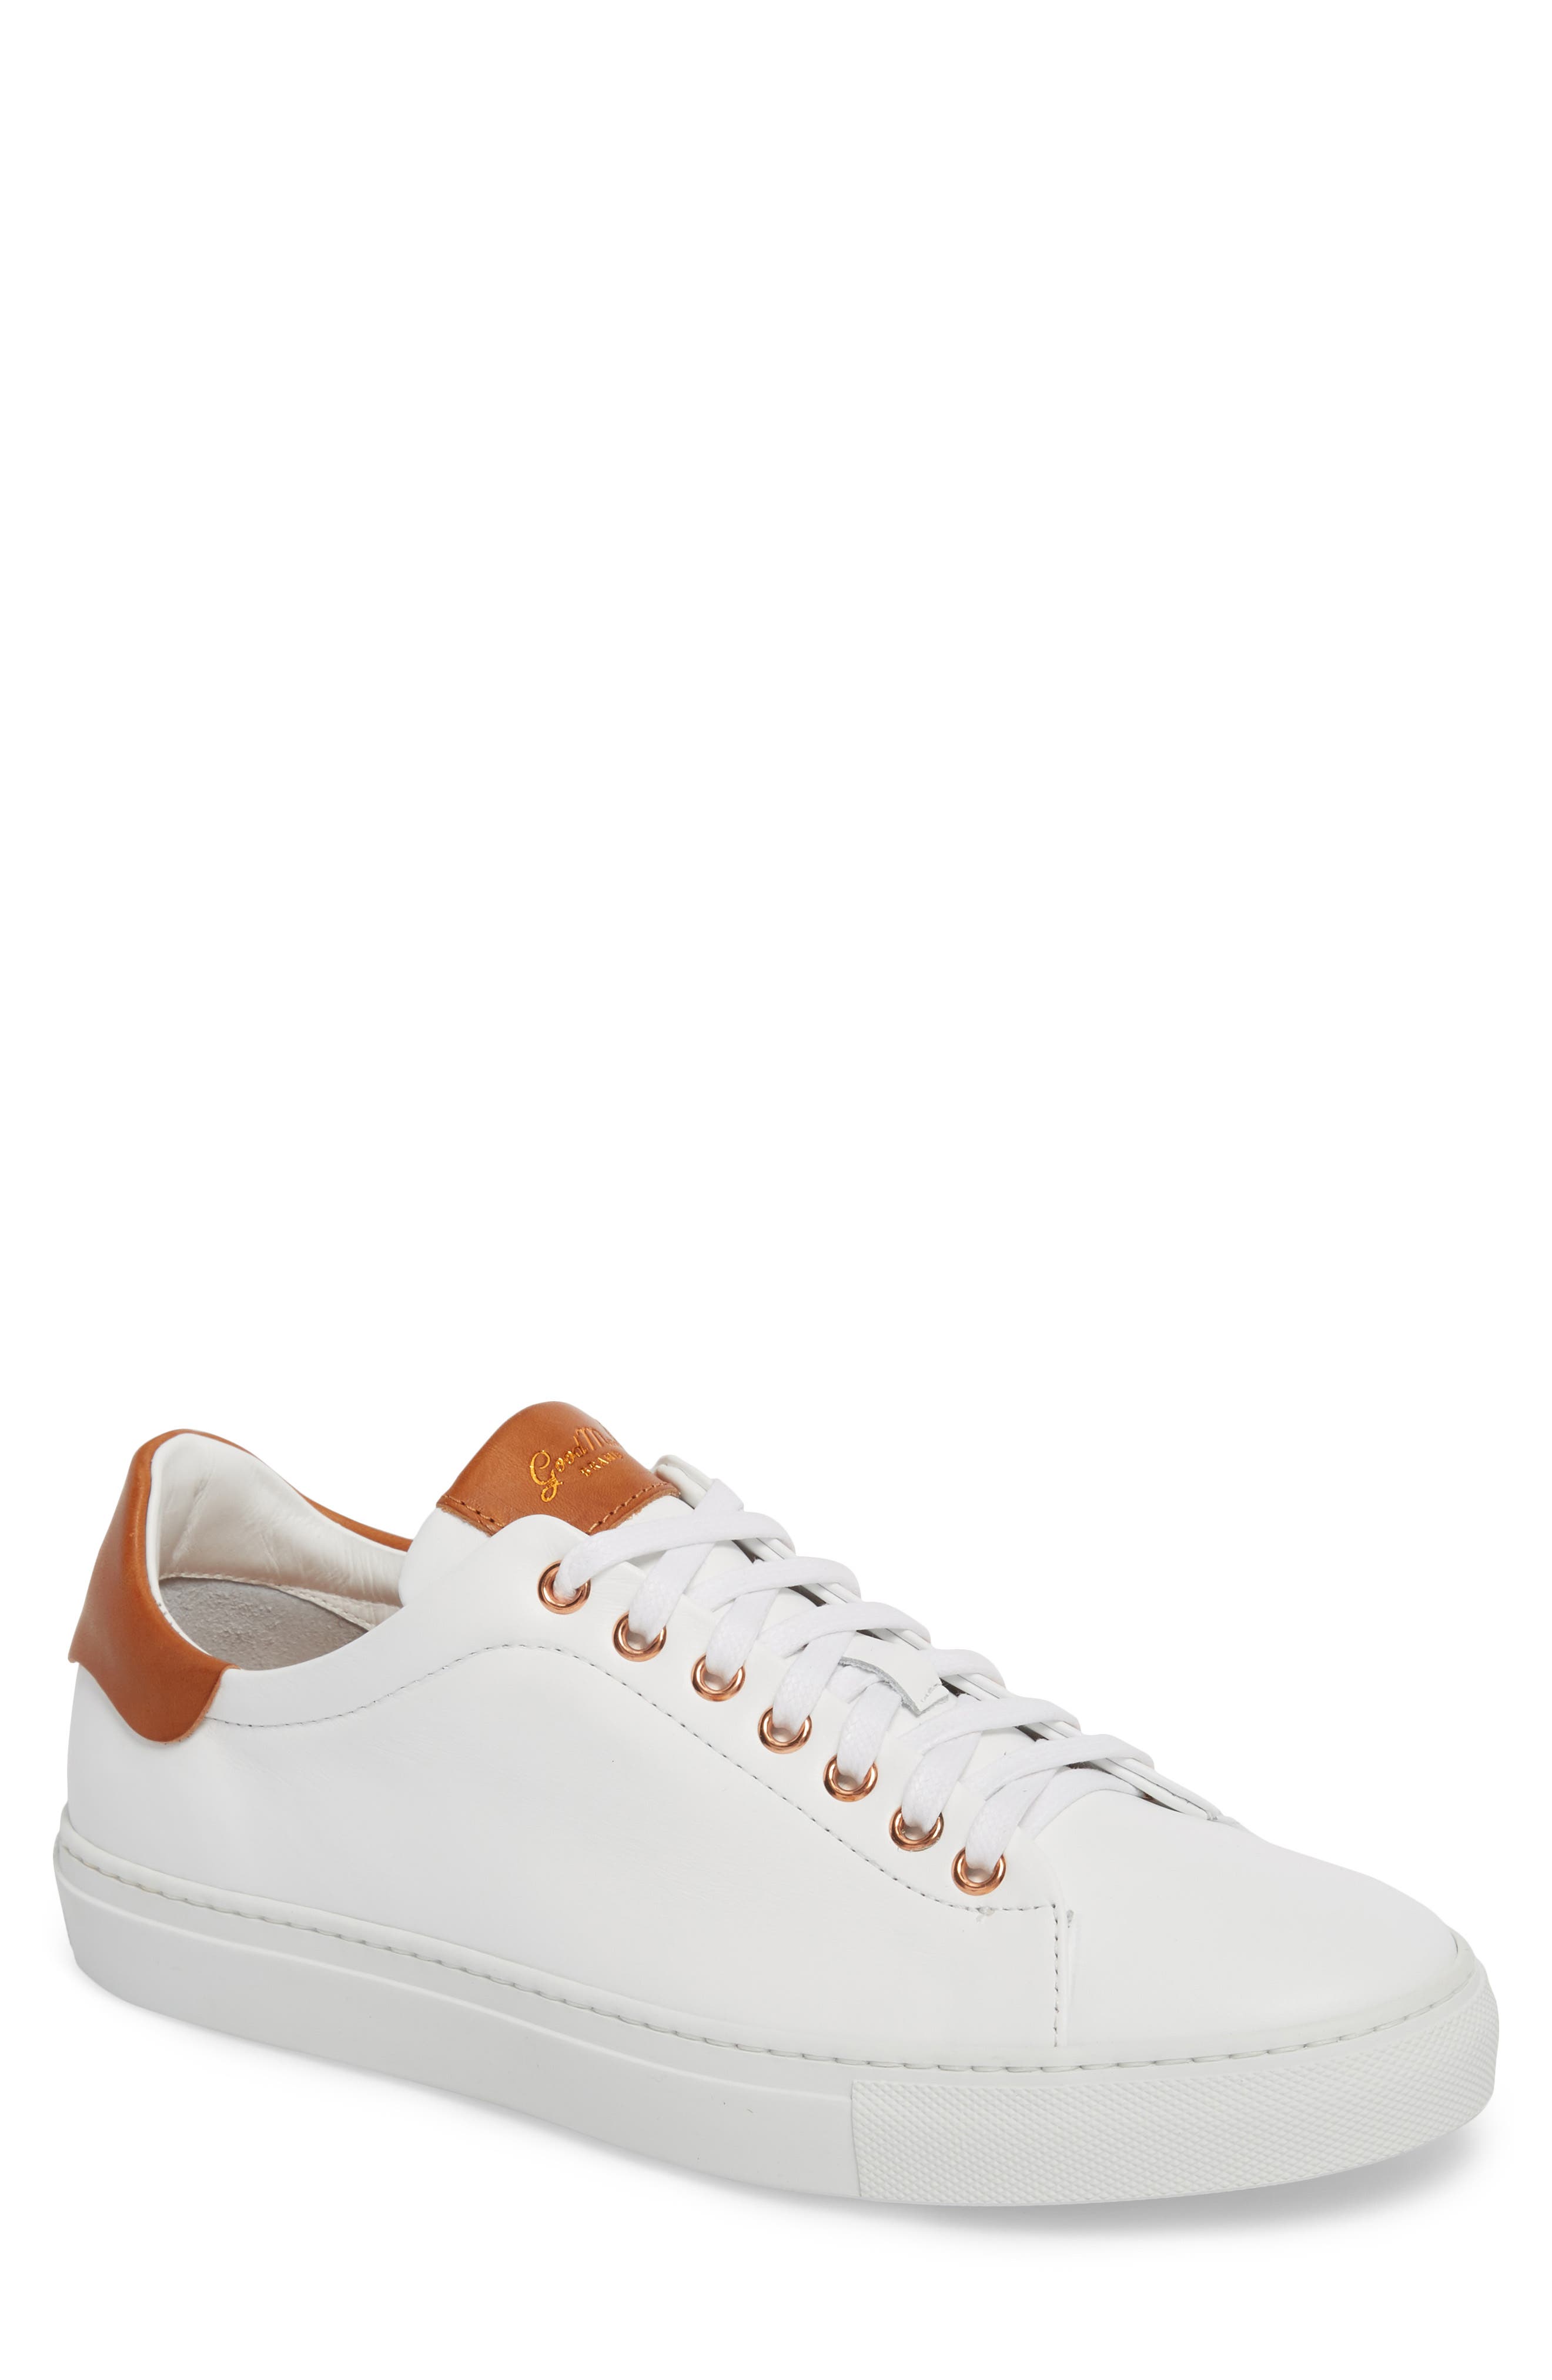 leather sneakers men white